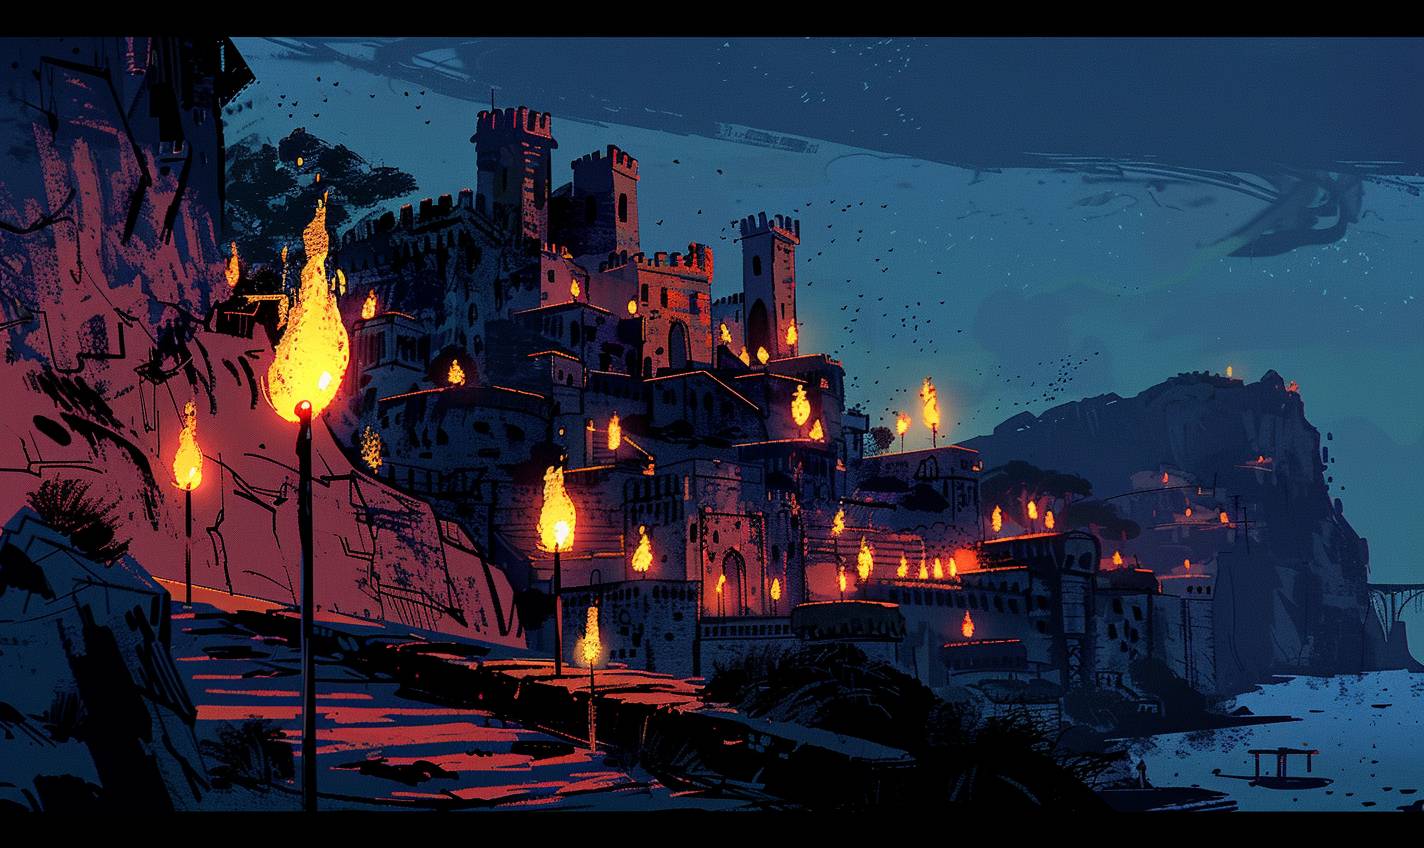 In the style of Jean Jullien, an ancient citadel lit by flickering torches